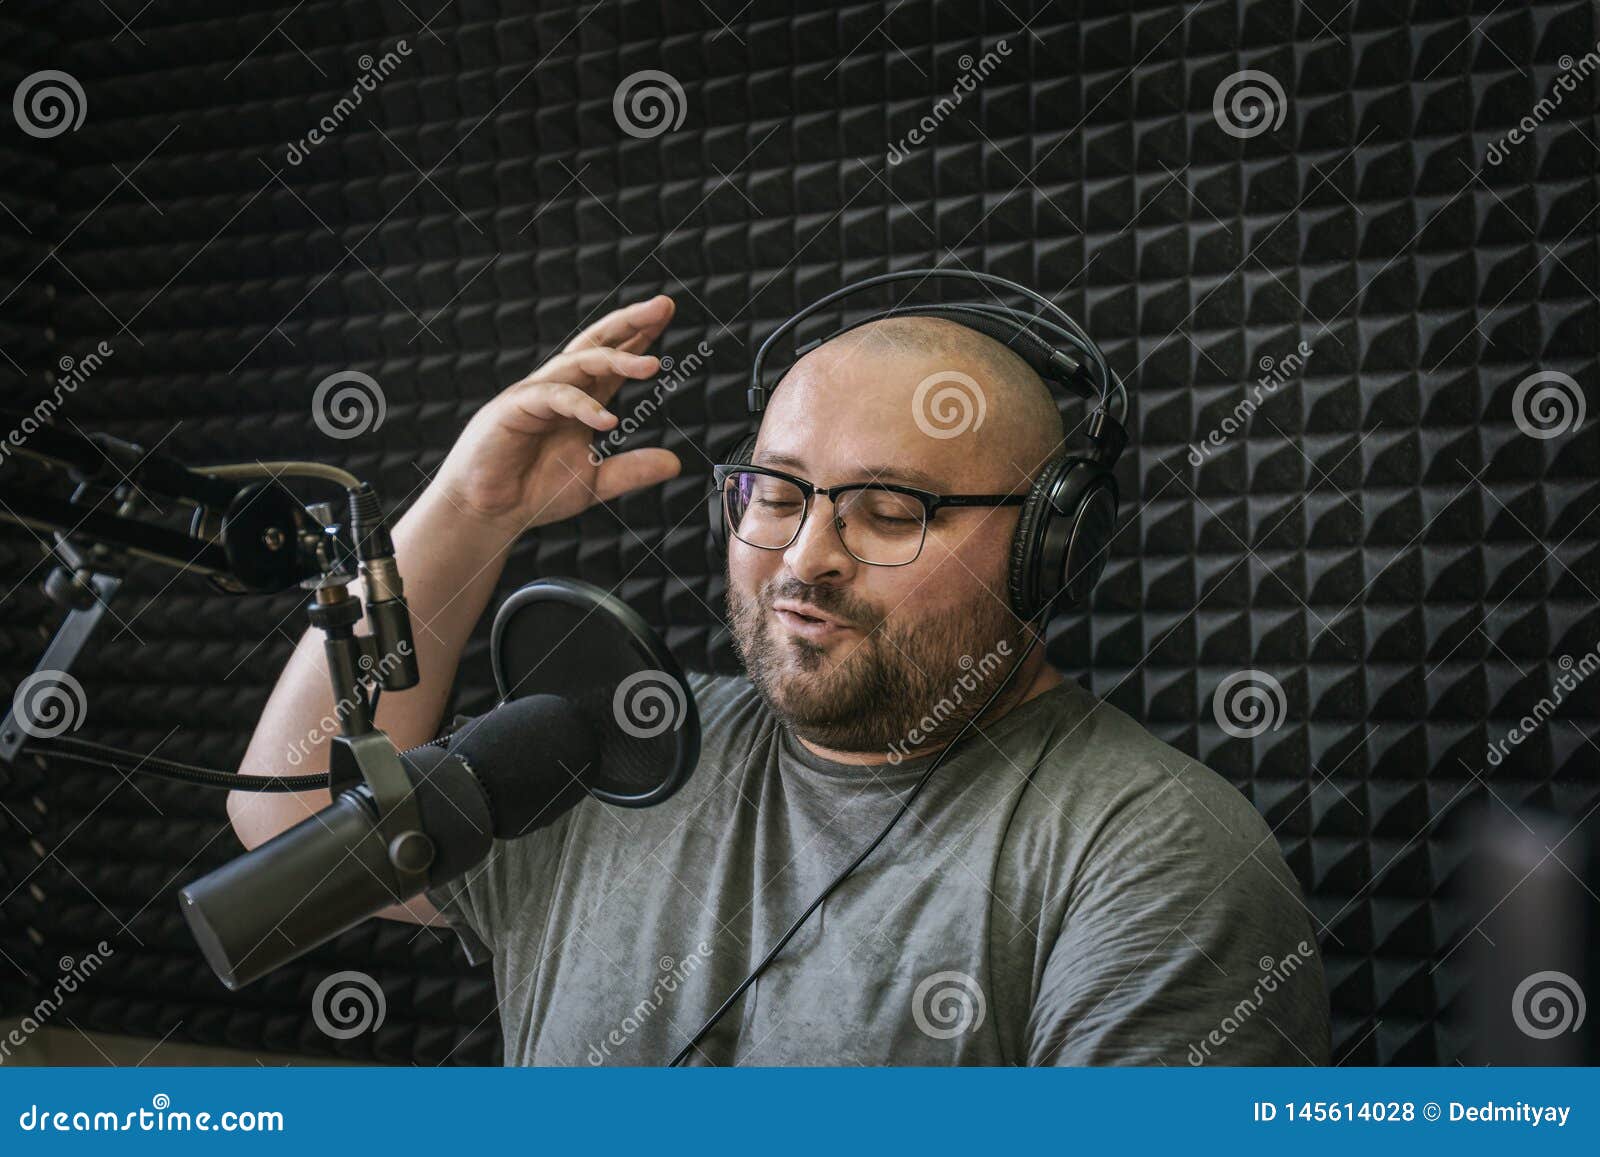 smiling and gesturing radio host with headphones on his head reading news from paper into studio microphone on radio station